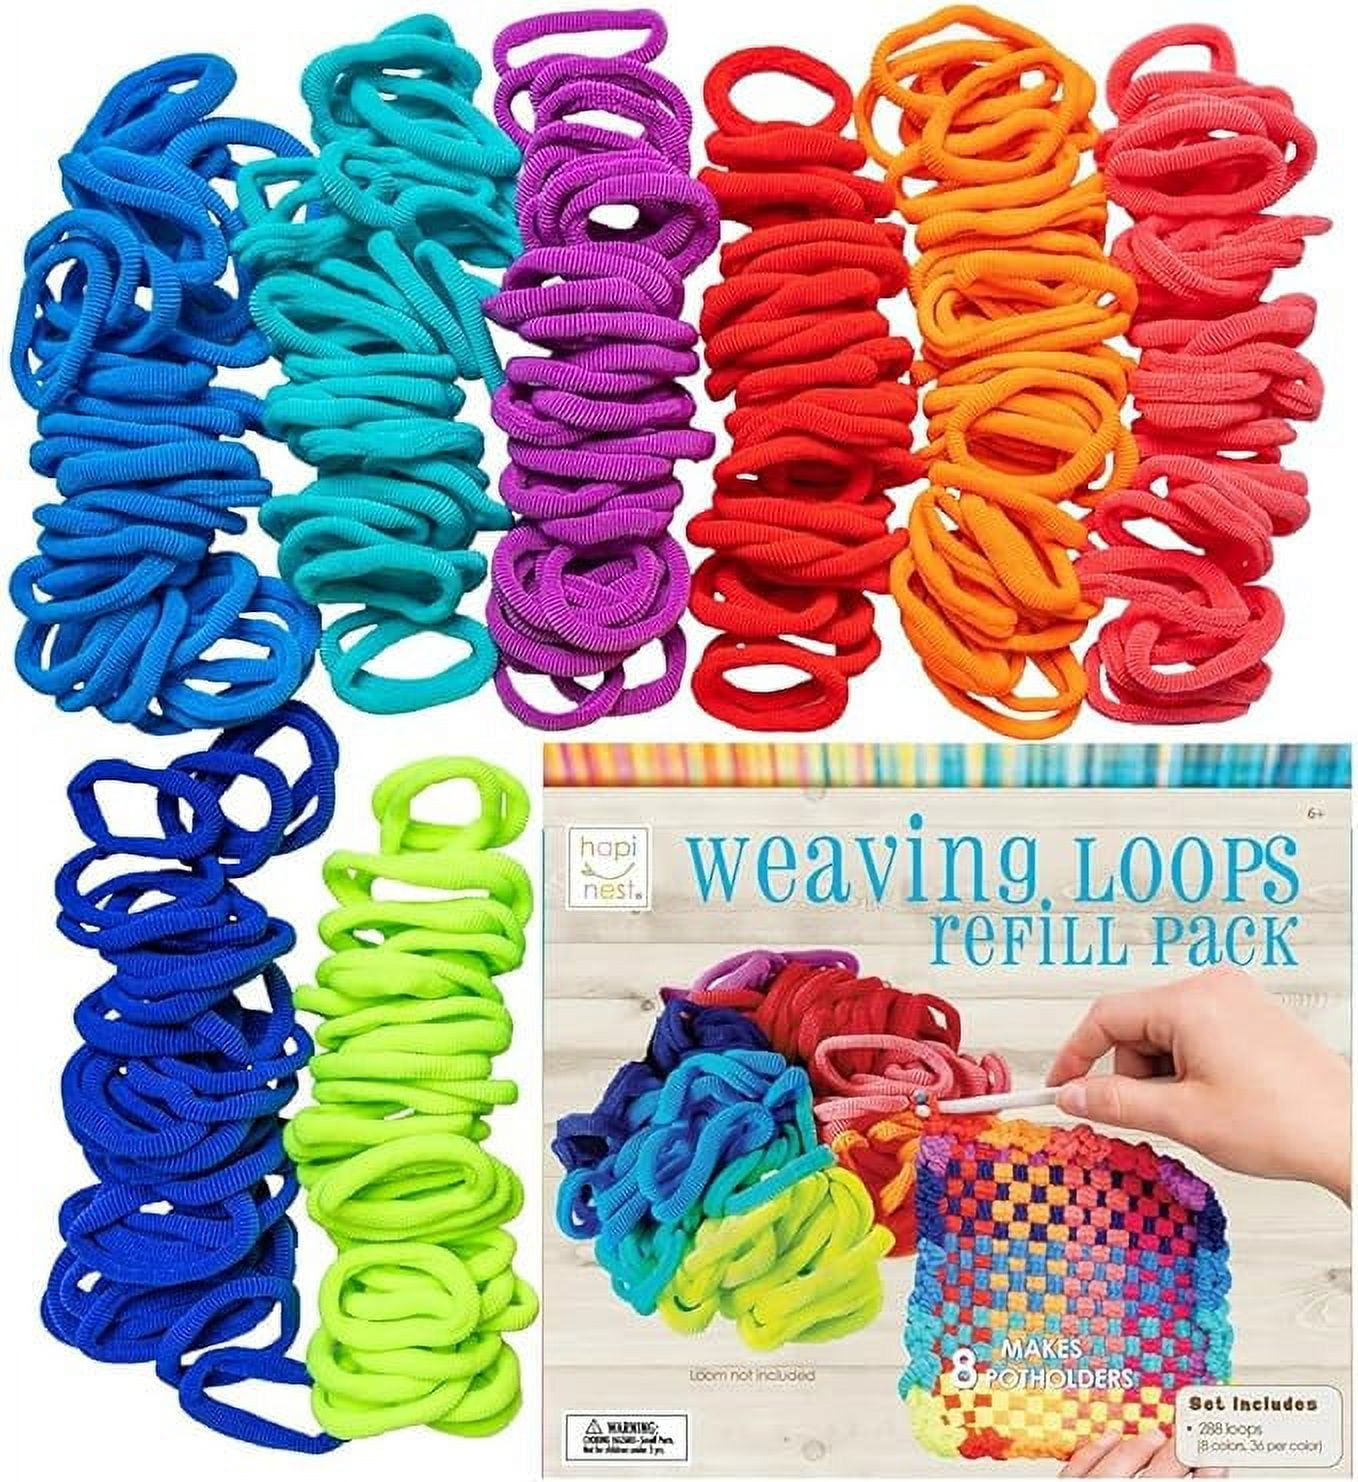 Hapinest Loom Bands Potholder Weaving Refill Pack for Kids | Set Makes 8  Pot Holders and Includes 288 Loops in 8 Colors